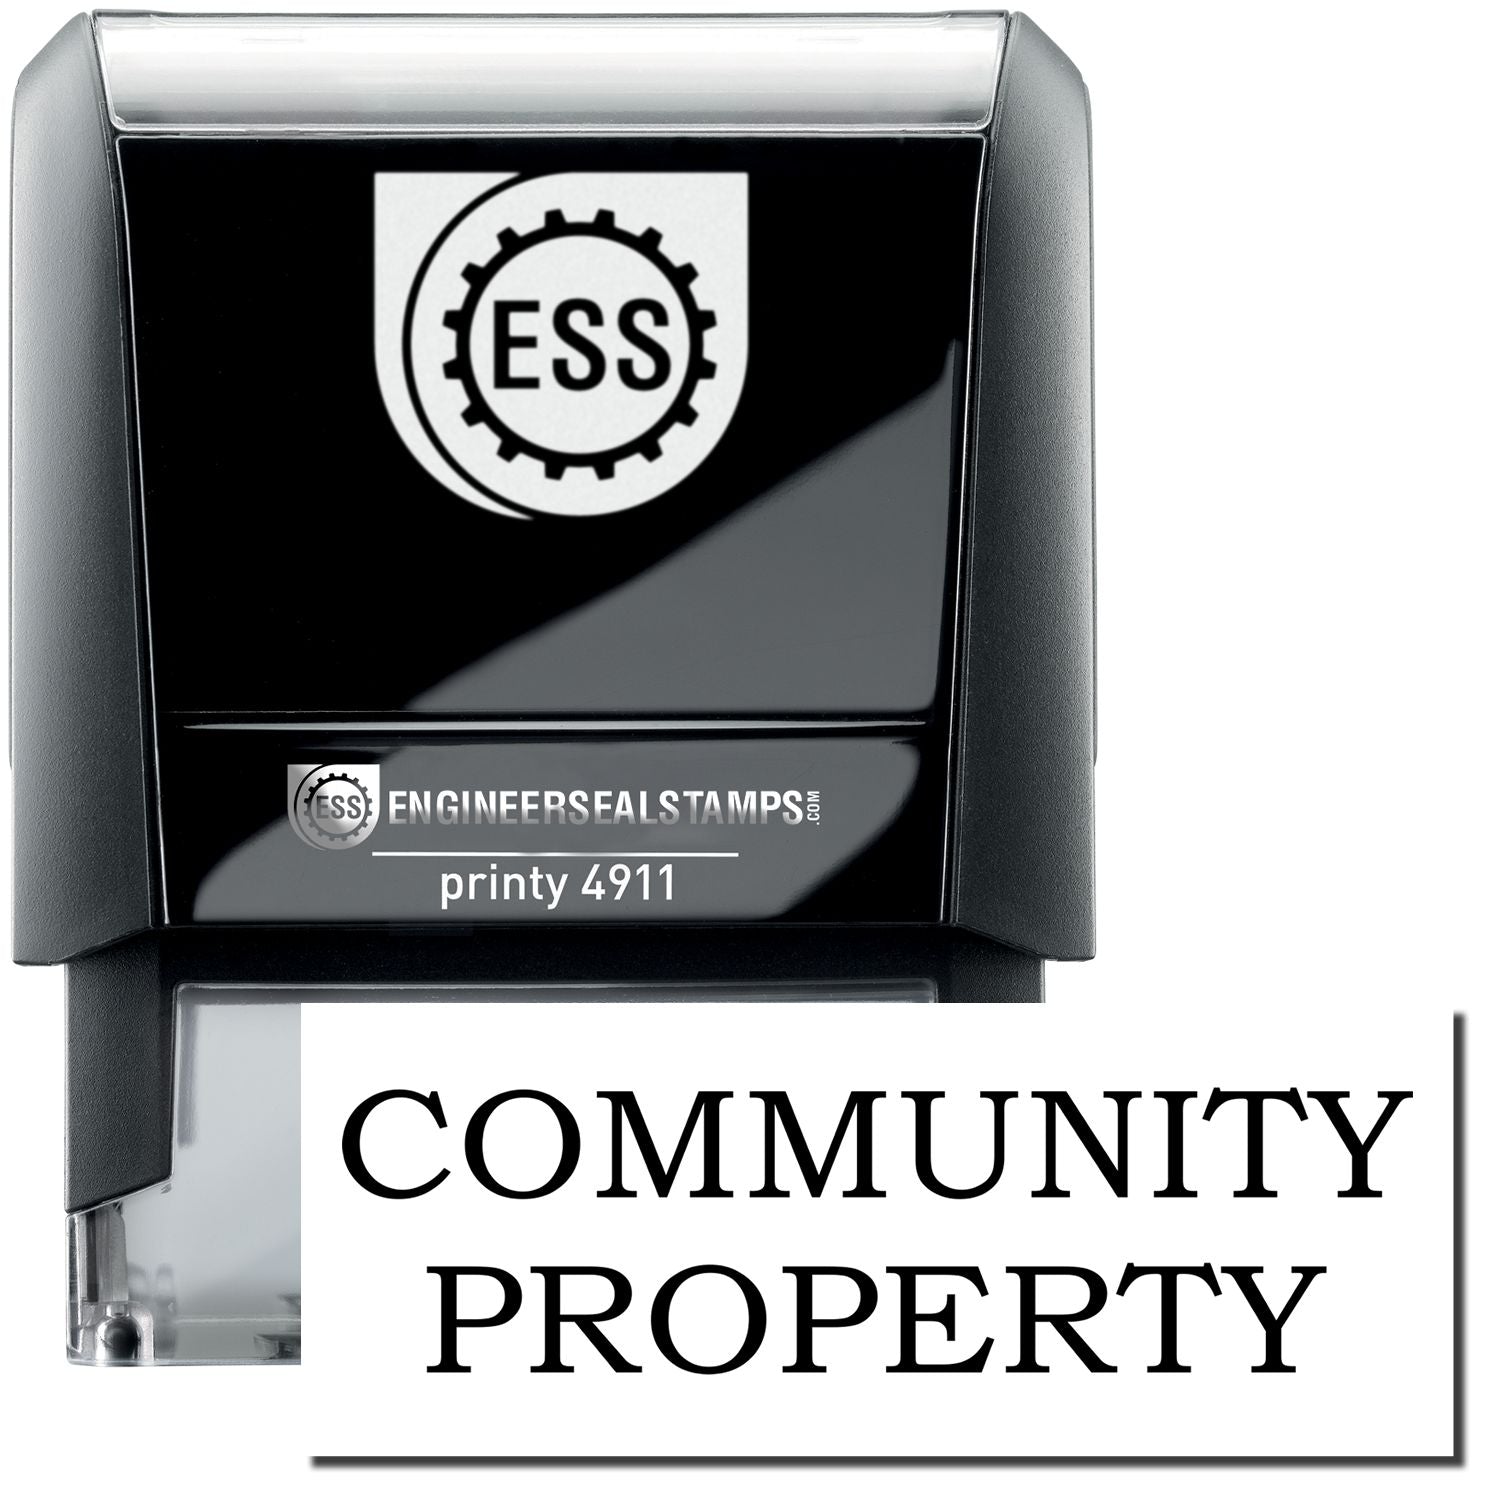 A self-inking stamp with a stamped image showing how the text "COMMUNITY PROPERTY" is displayed after stamping.